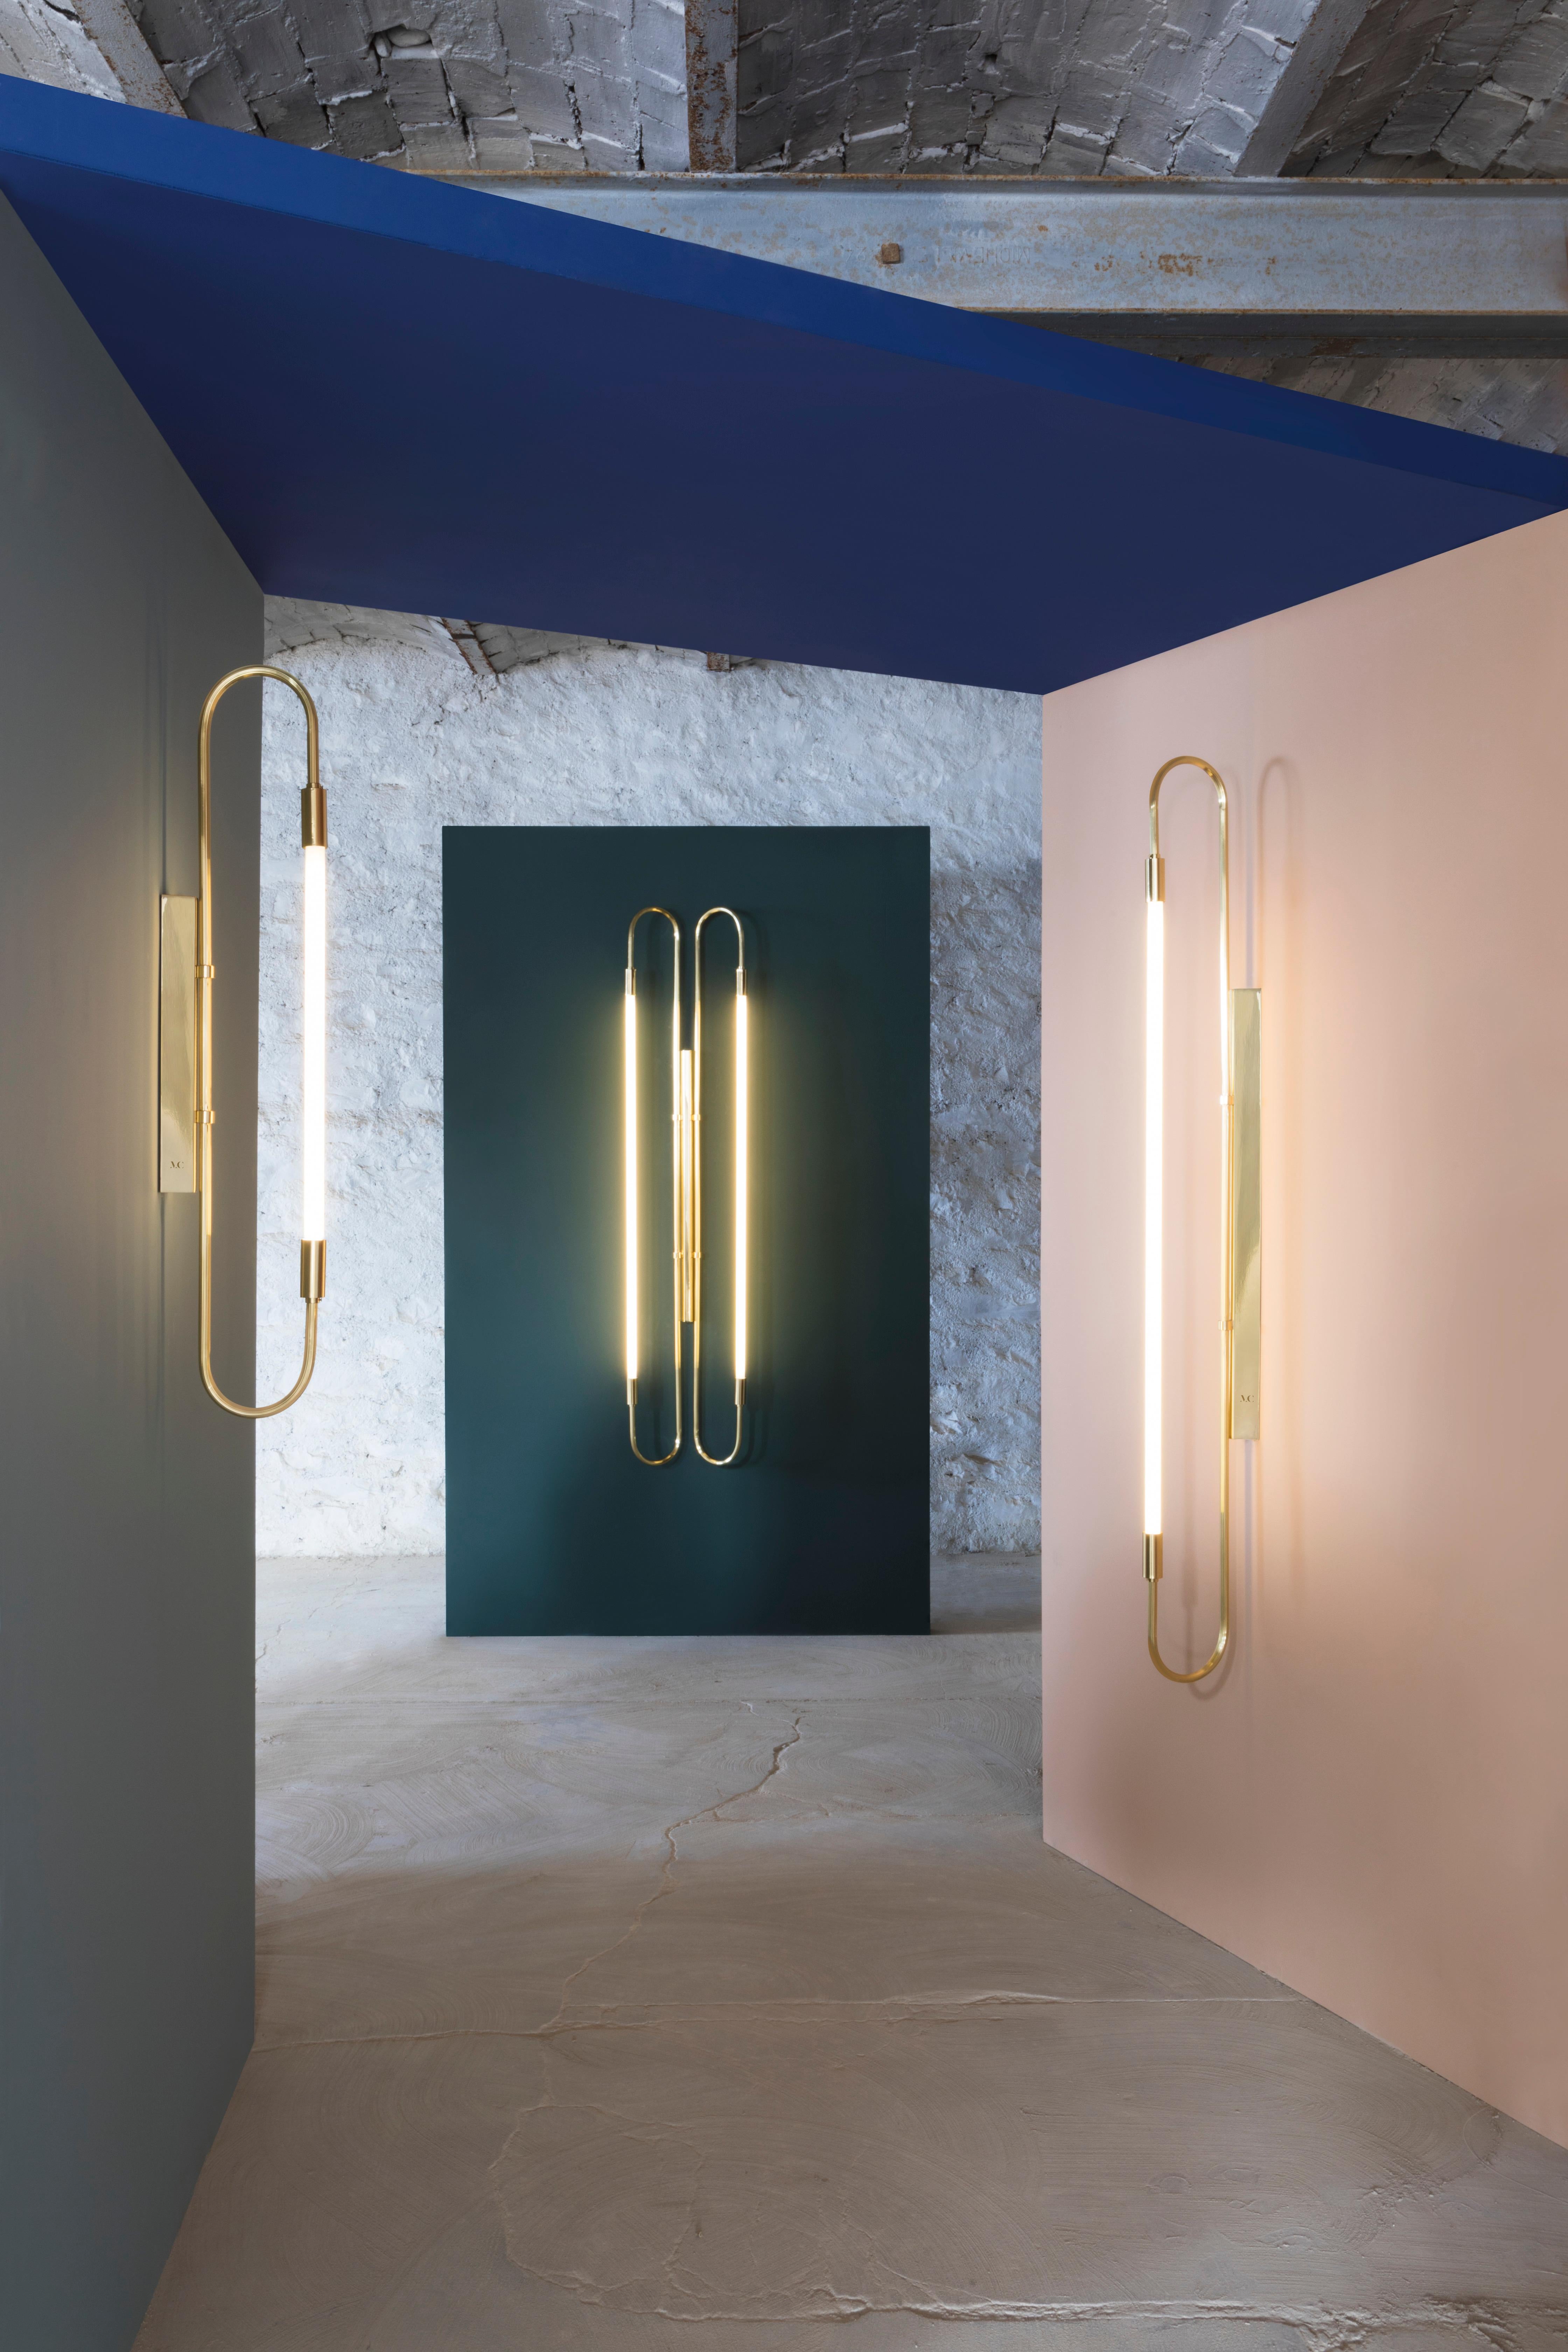 Pair of nickel wall lamps neon double 103 by Magic Circus Editions
Dimensions: H. 103 cm, W. 37 cm, D. 11 cm, 3.6 kg.
Materials: fluted brass tube and glass.
Available finishes: brass (lacquered polished brass, unlacquered polished brass, brushed